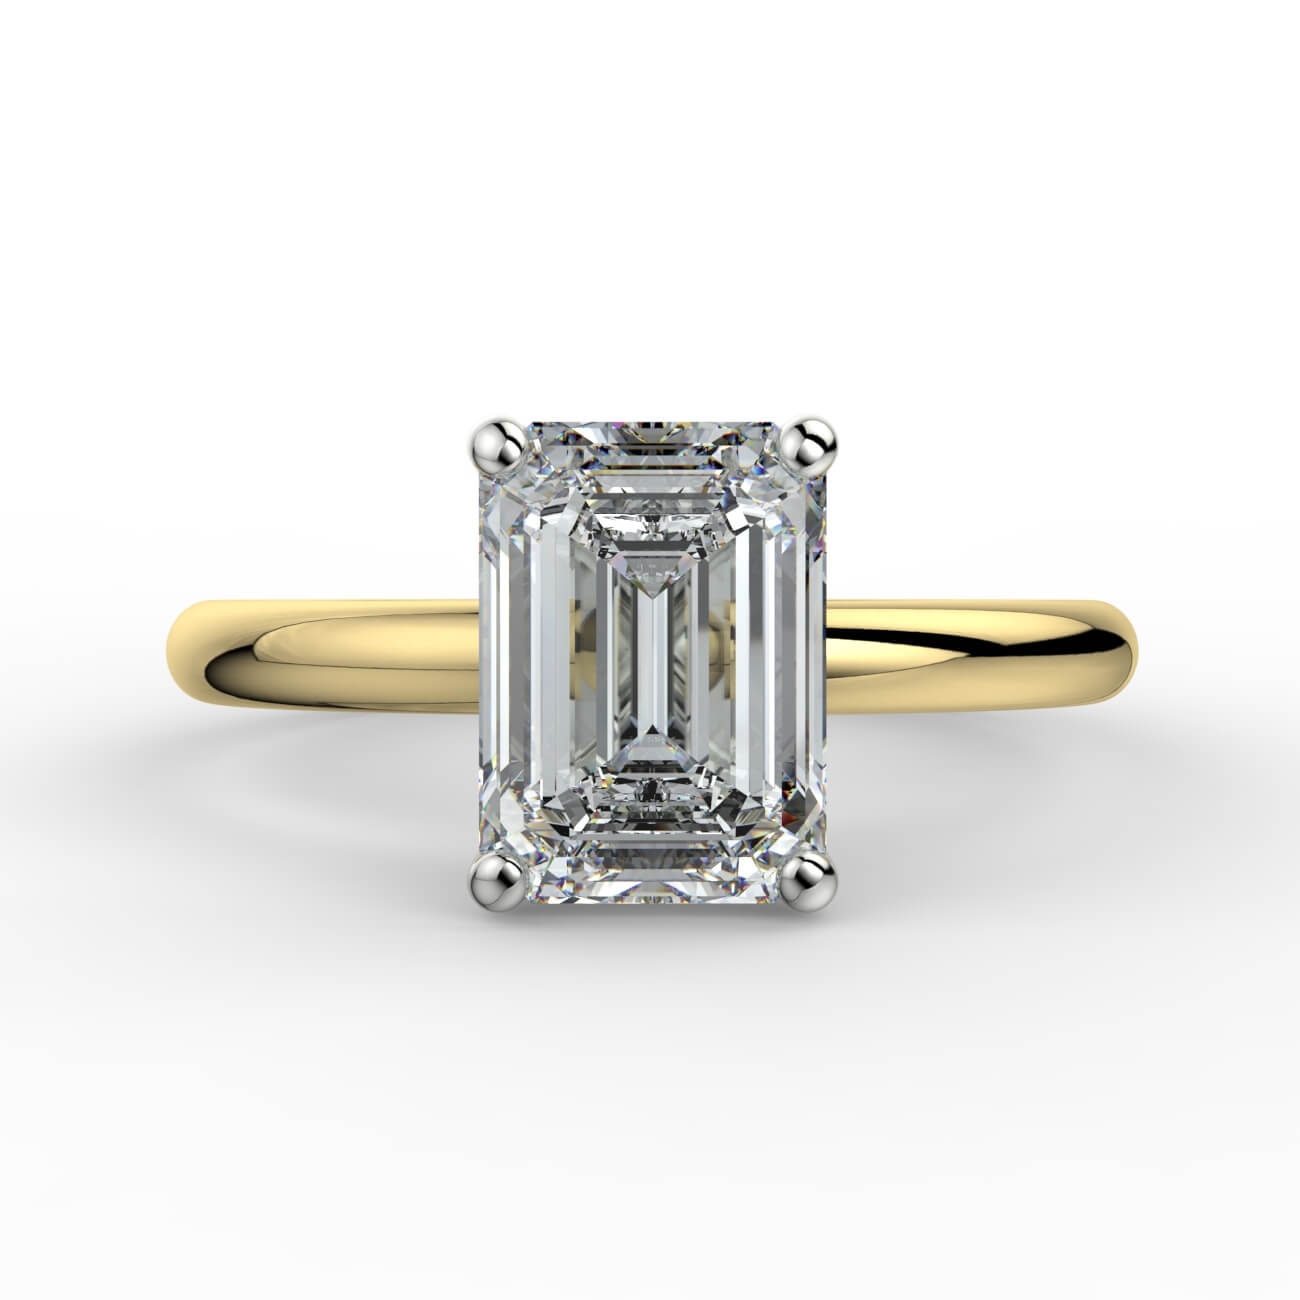 Solitaire emerald cut diamond engagement ring in yellow and white gold – Australian Diamond Network